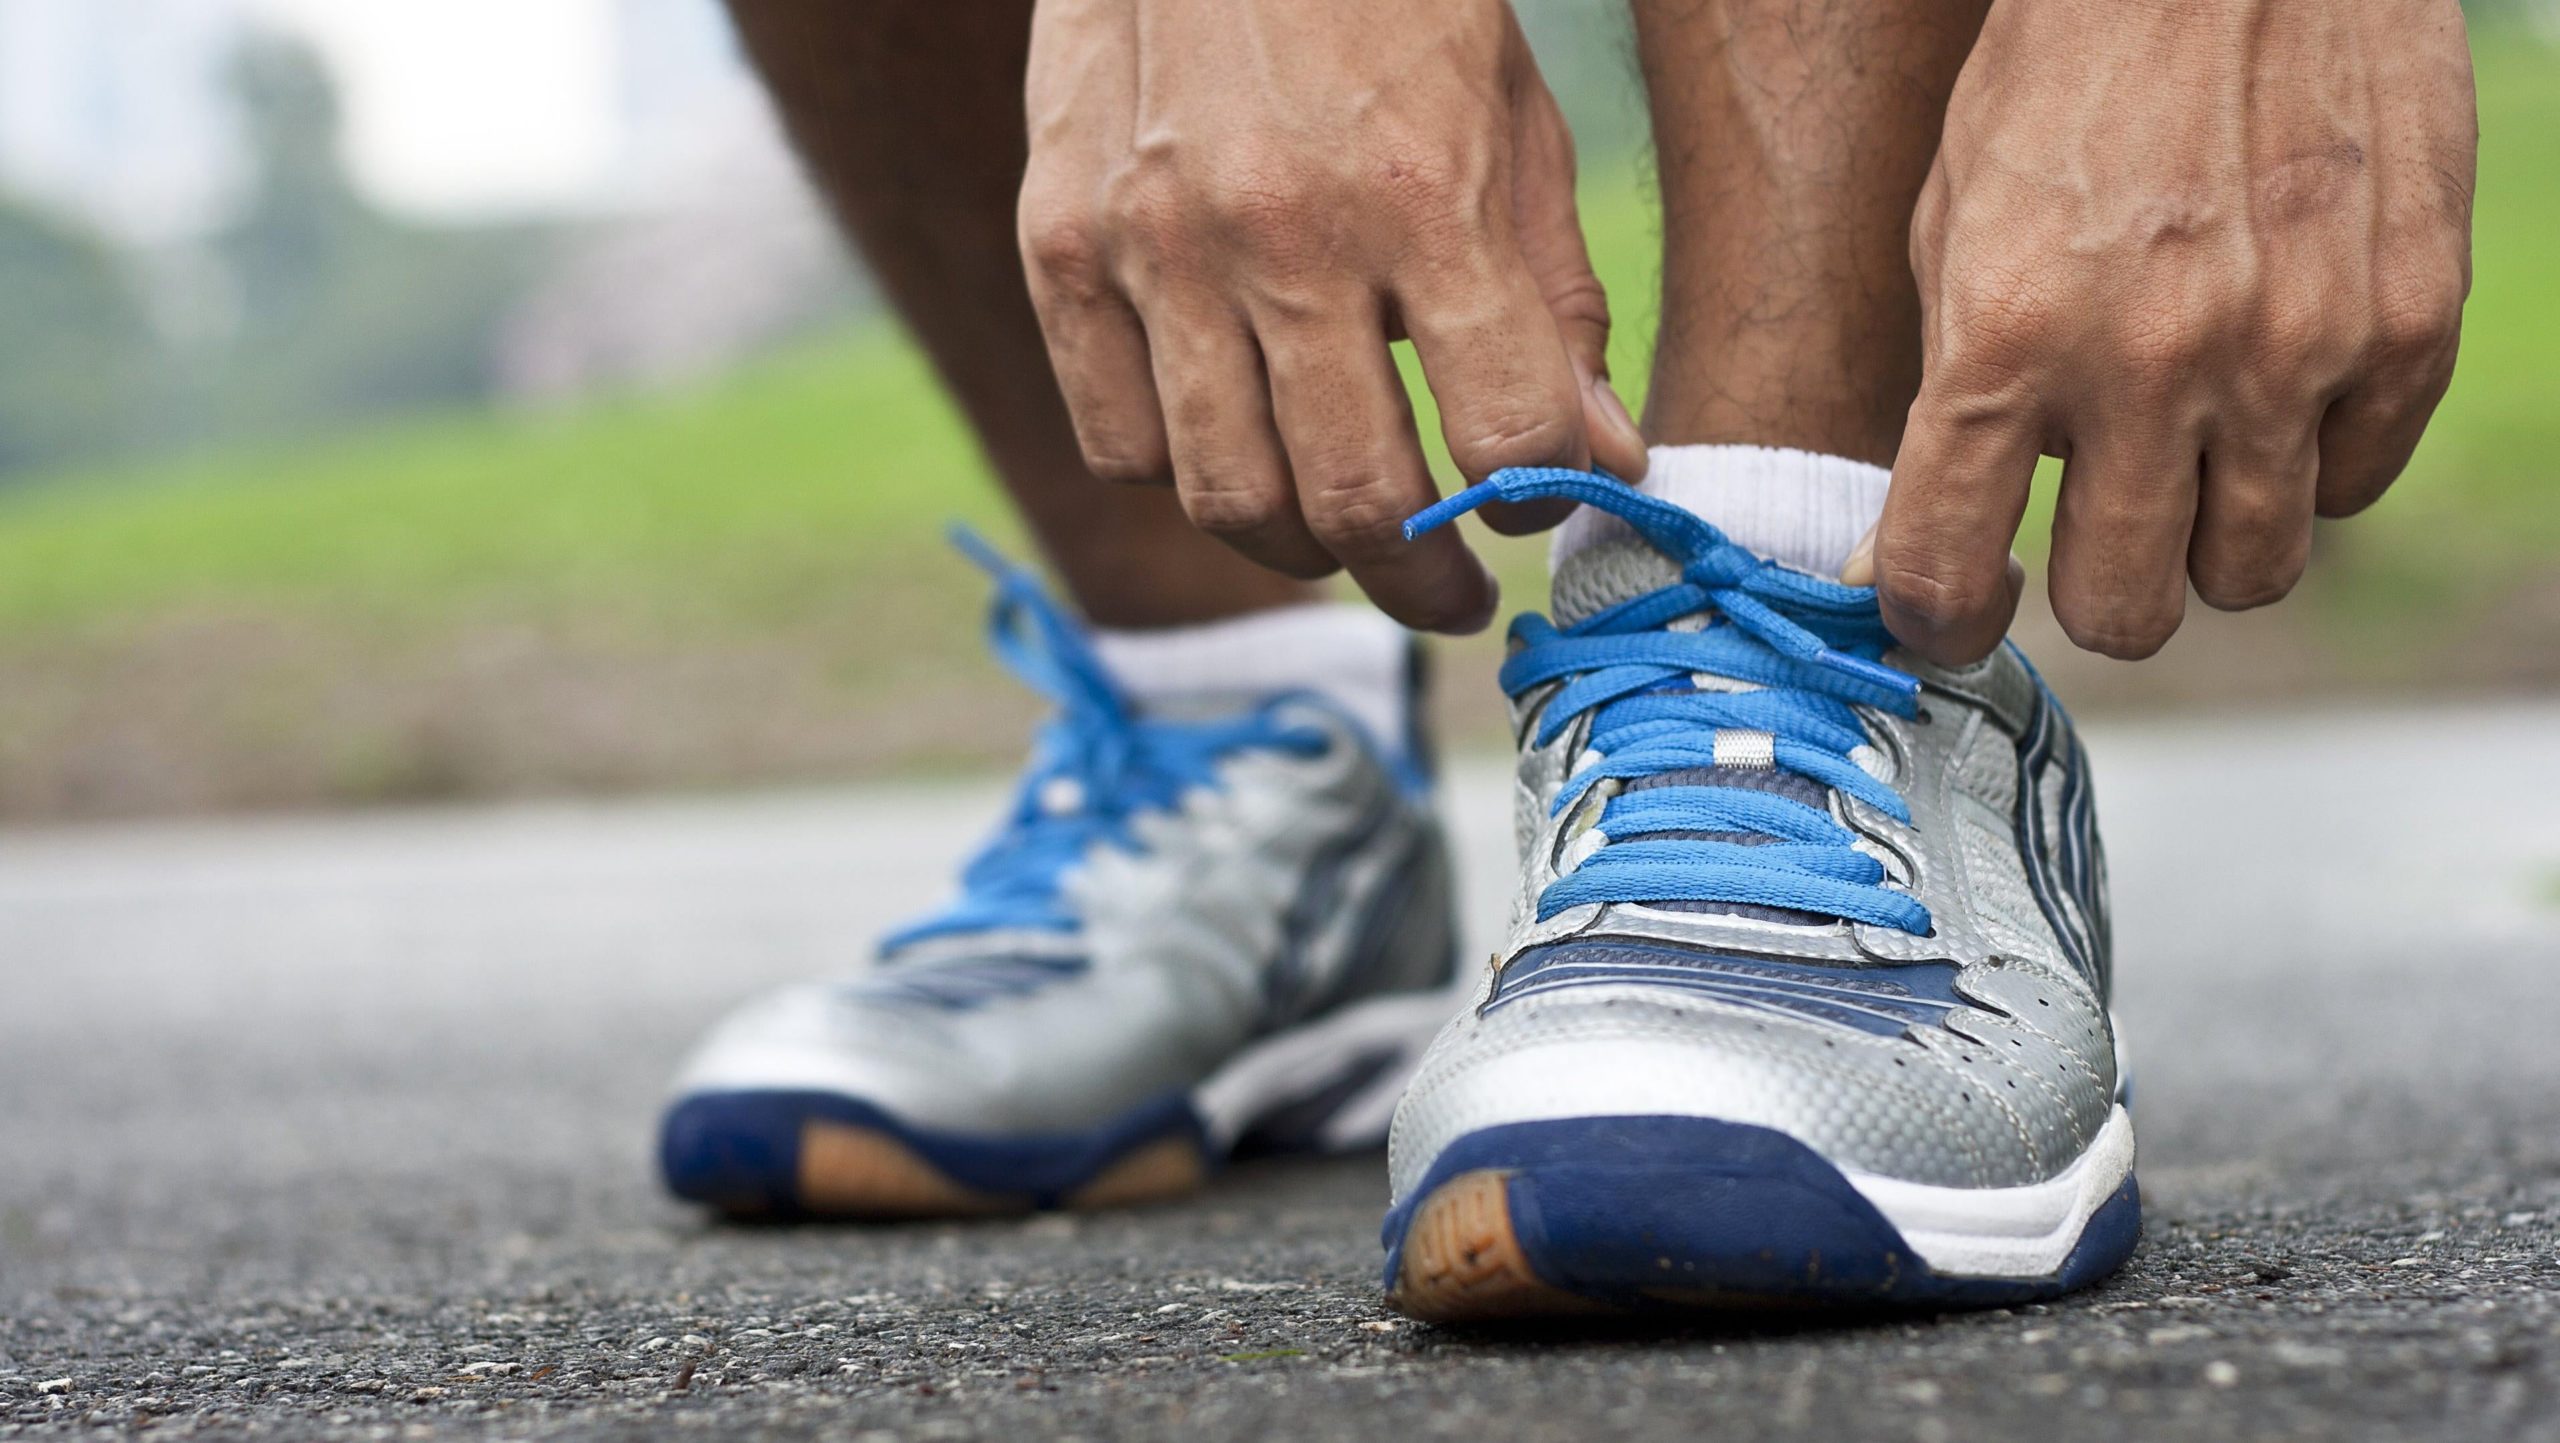 Here’s Where You Can Return Running Shoes, Even If You’ve Already Run in Them